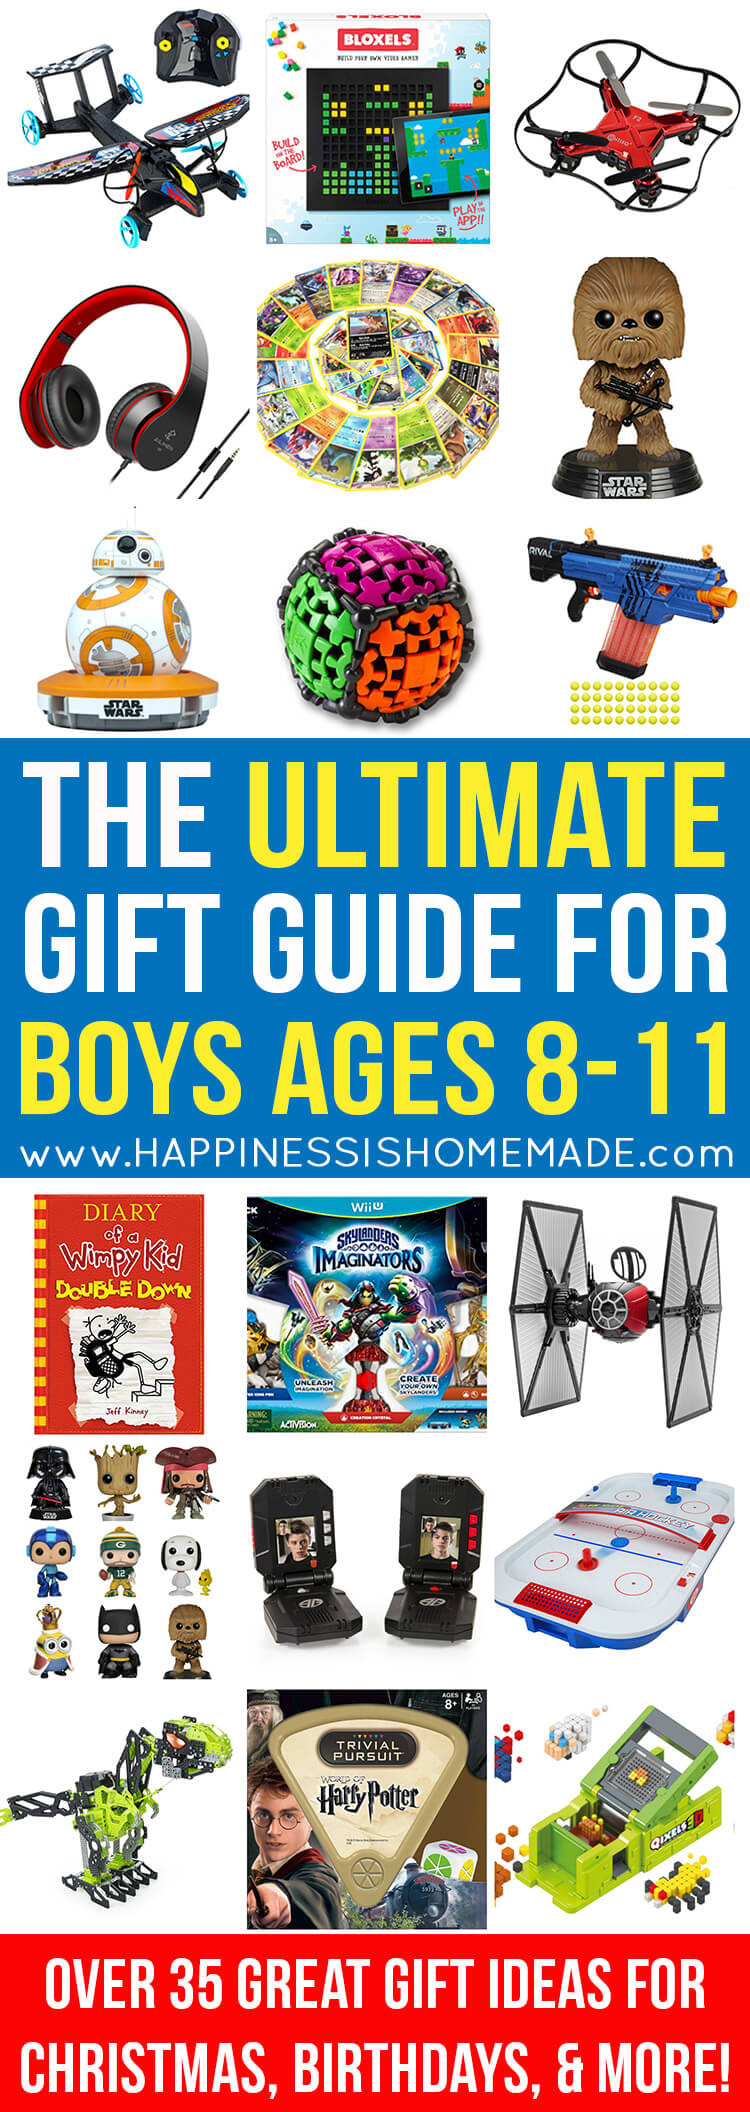 Best Gift Ideas For Boys
 The Best Gift Ideas for Boys Ages 8 11 Happiness is Homemade